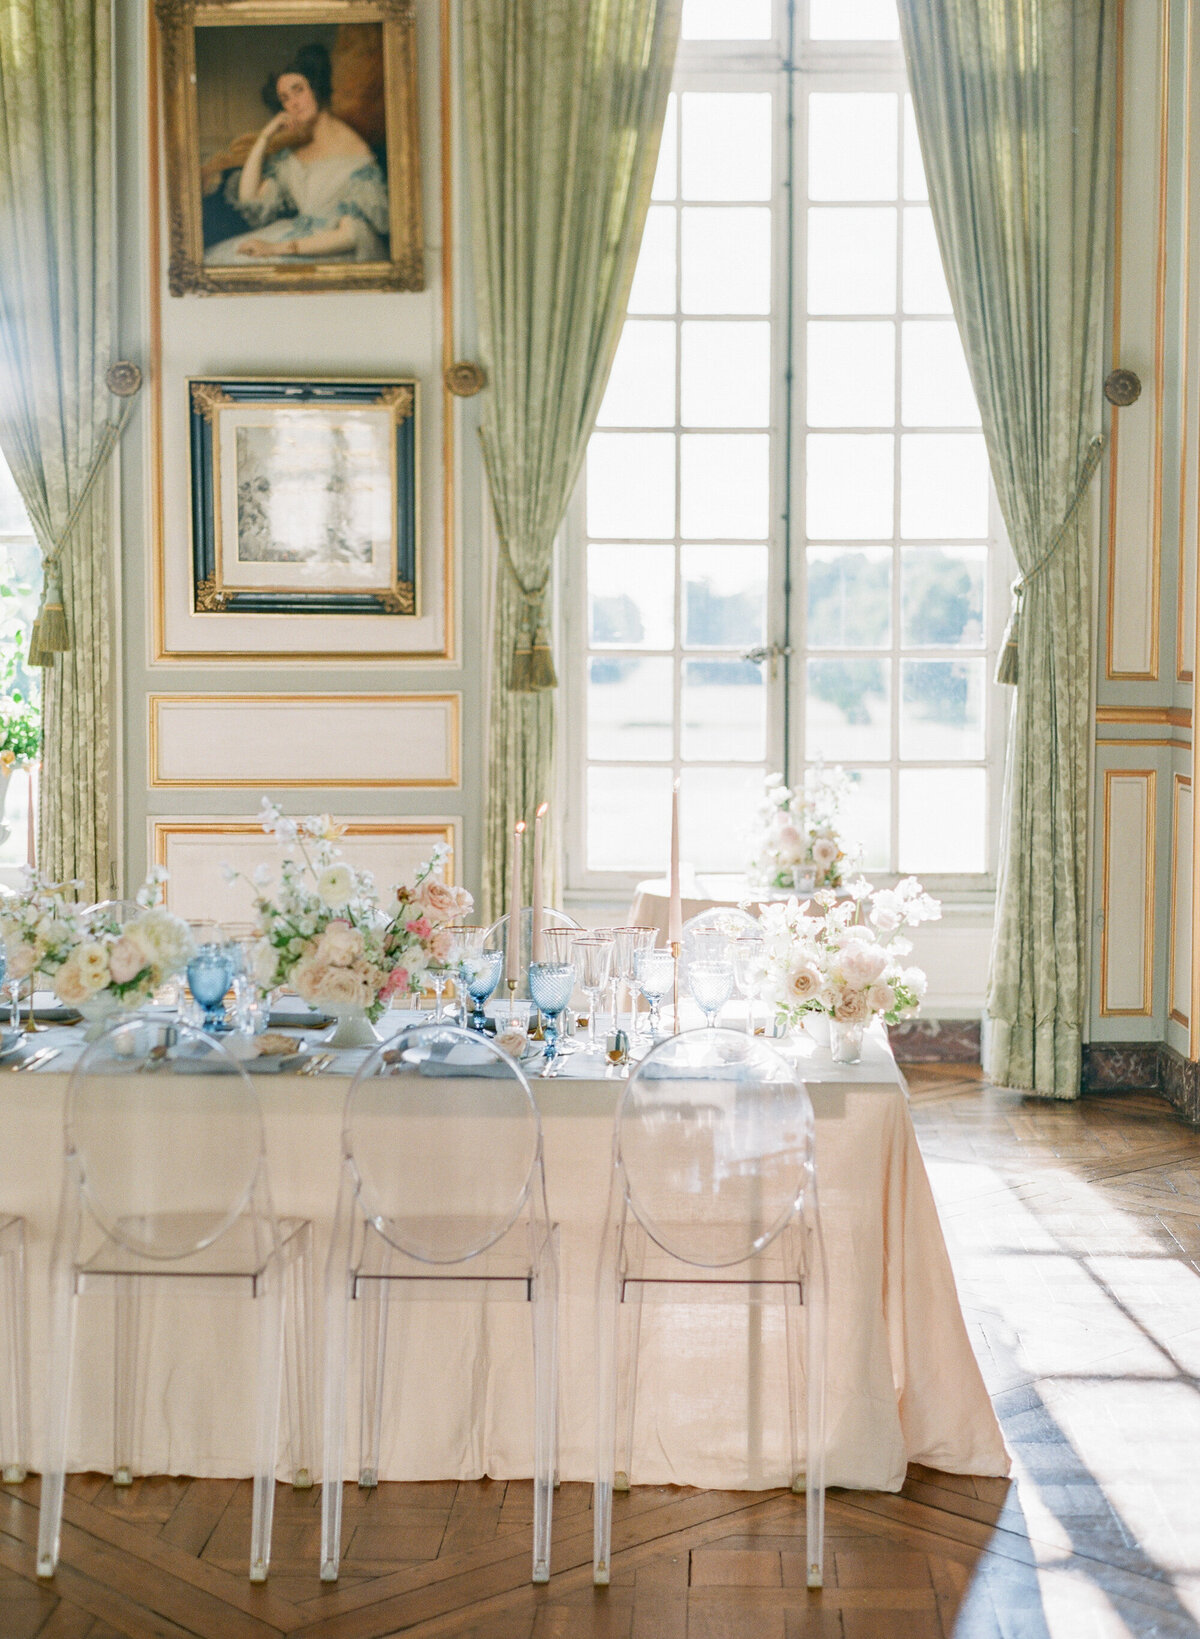 Jennifer Fox Weddings English speaking wedding planning & design agency in France crafting refined and bespoke weddings and celebrations Provence, Paris and destination Laurel-Chris-Chateau-de-Champlatreaux-Molly-Carr-Photography-80